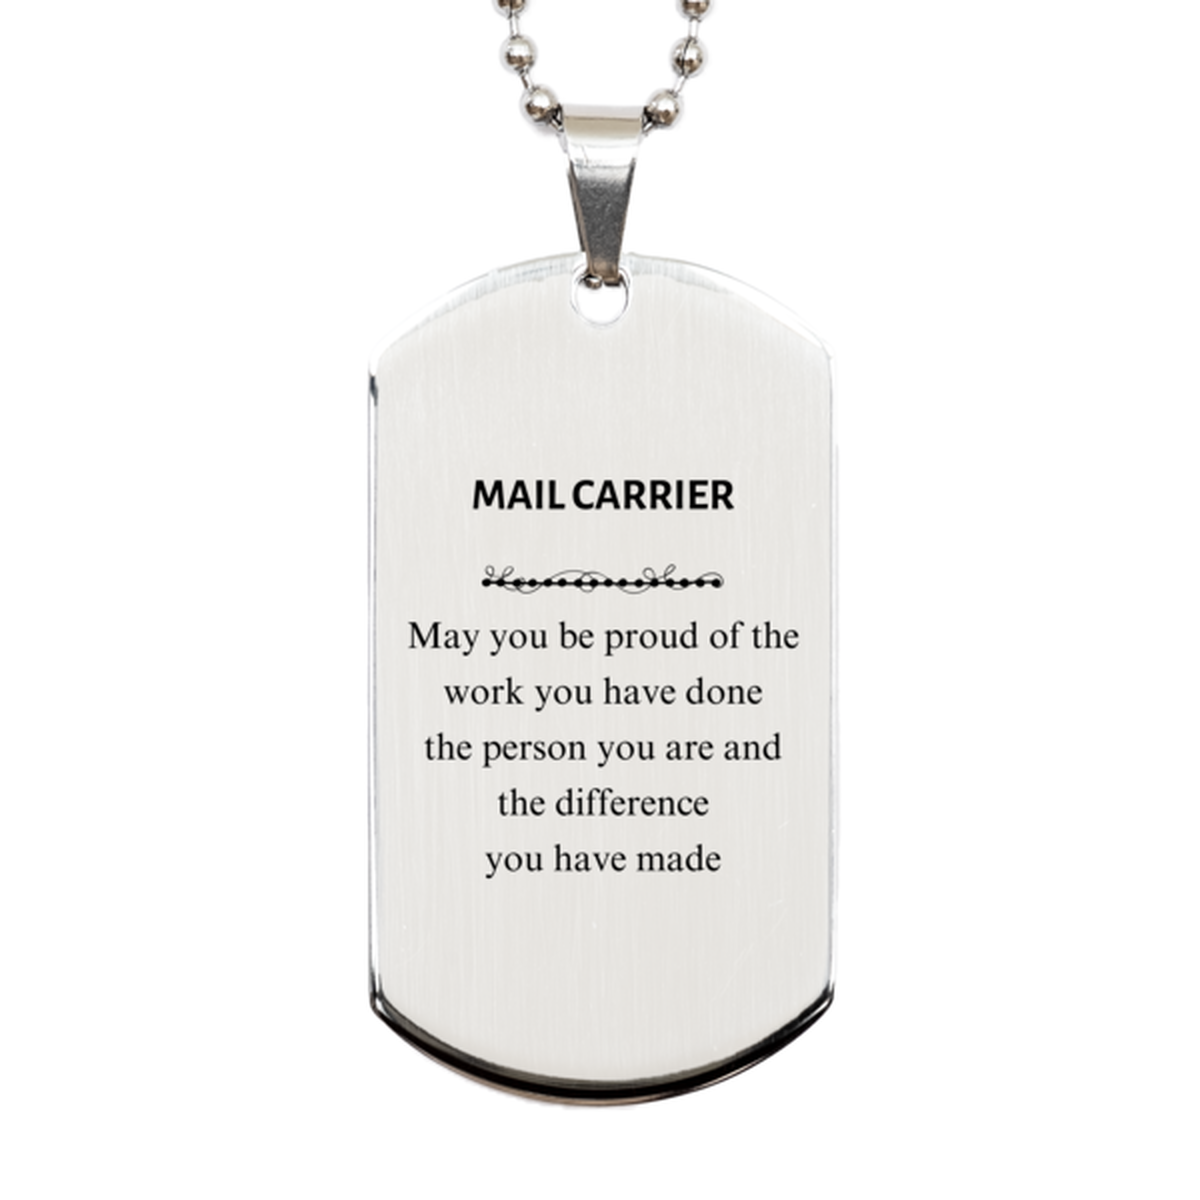 Mail Carrier May you be proud of the work you have done, Retirement Mail Carrier Silver Dog Tag for Colleague Appreciation Gifts Amazing for Mail Carrier